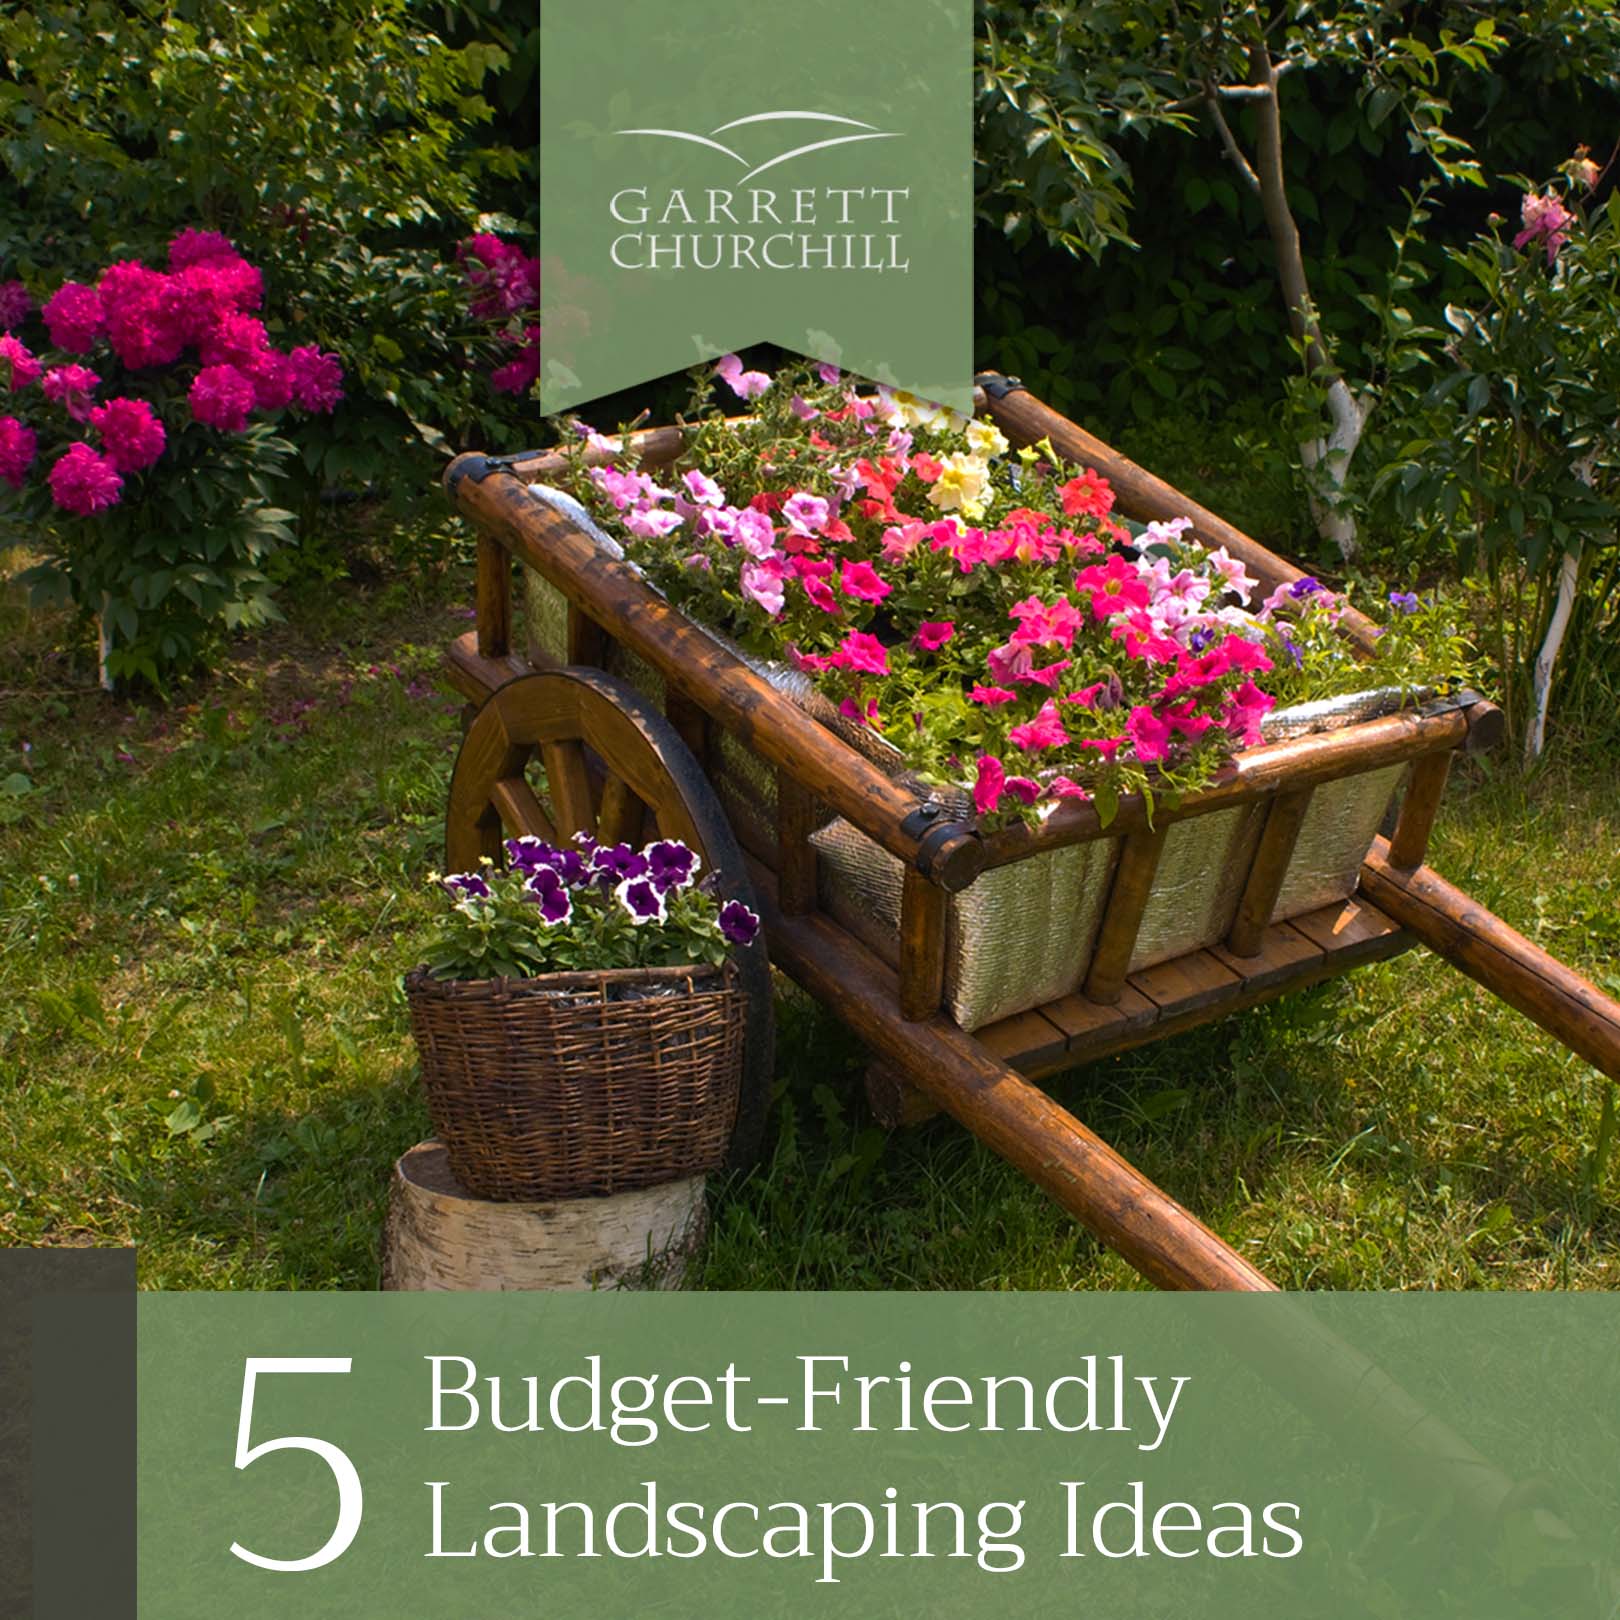 You are currently viewing 5 Budget-Friendly Landscaping Ideas